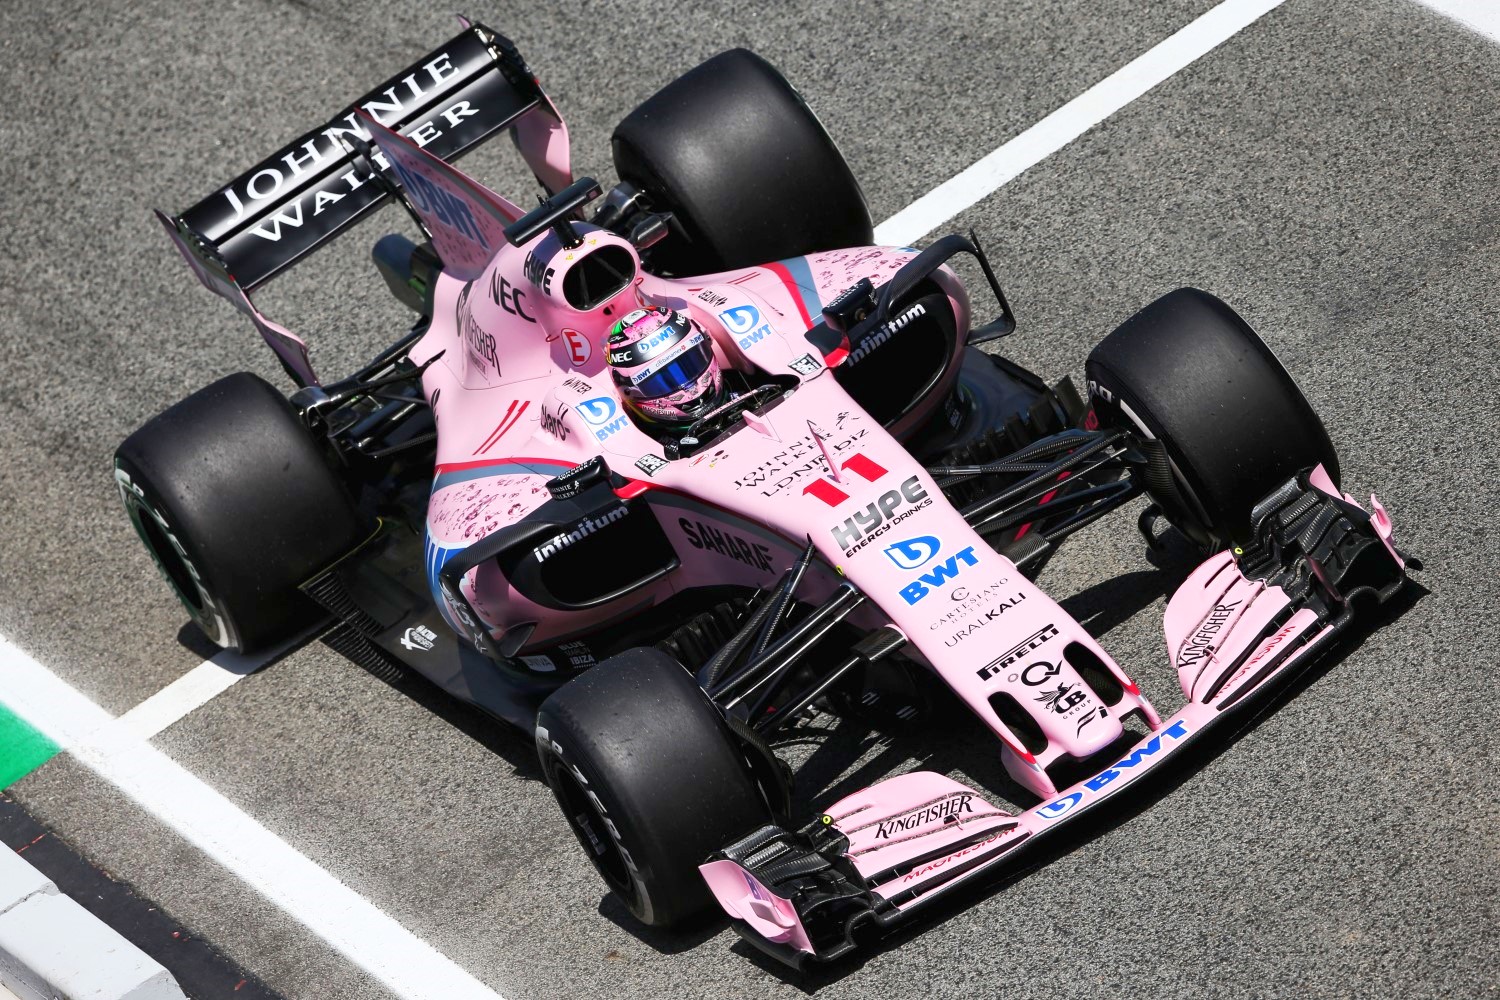 Perez in the Force India